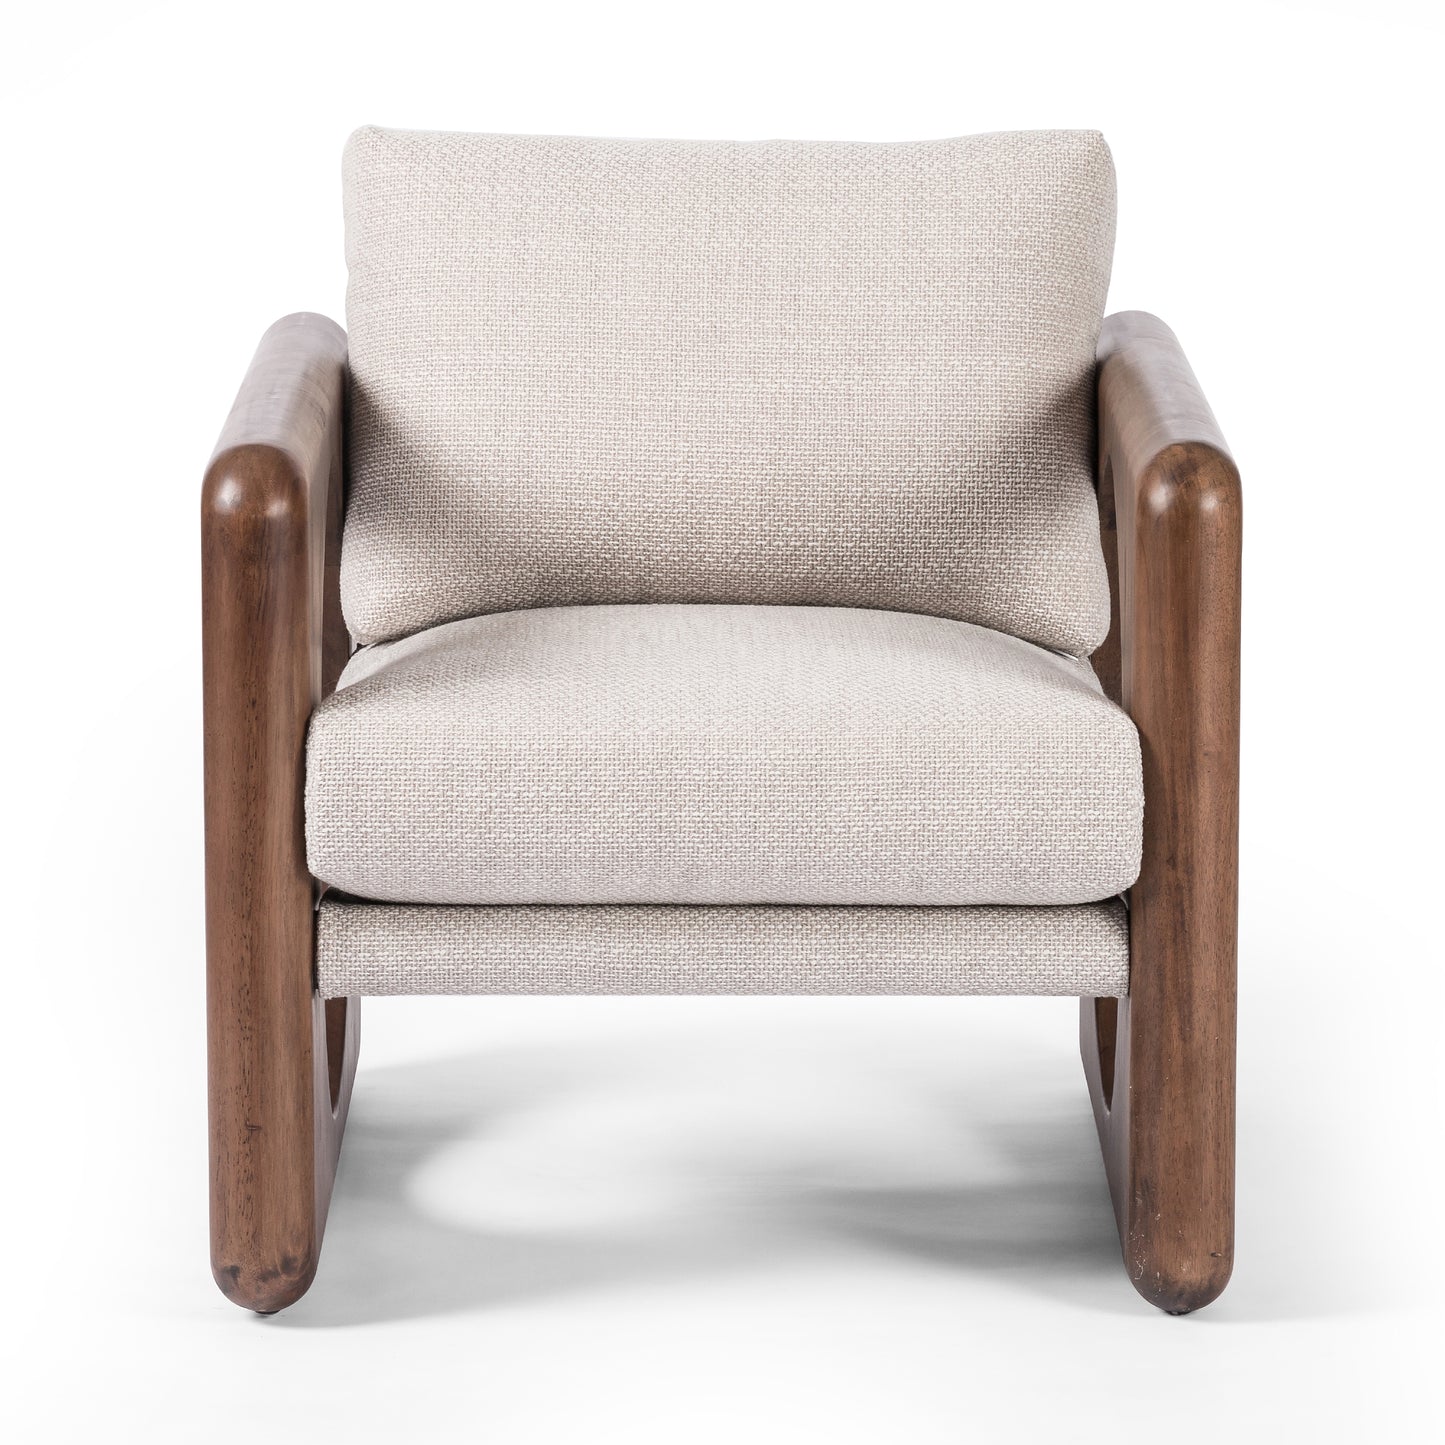 Downy Chair-Gibson Wheat Lounge Chair Four Hands     Four Hands, Mid Century Modern Furniture, Old Bones Furniture Company, Old Bones Co, Modern Mid Century, Designer Furniture, https://www.oldbonesco.com/